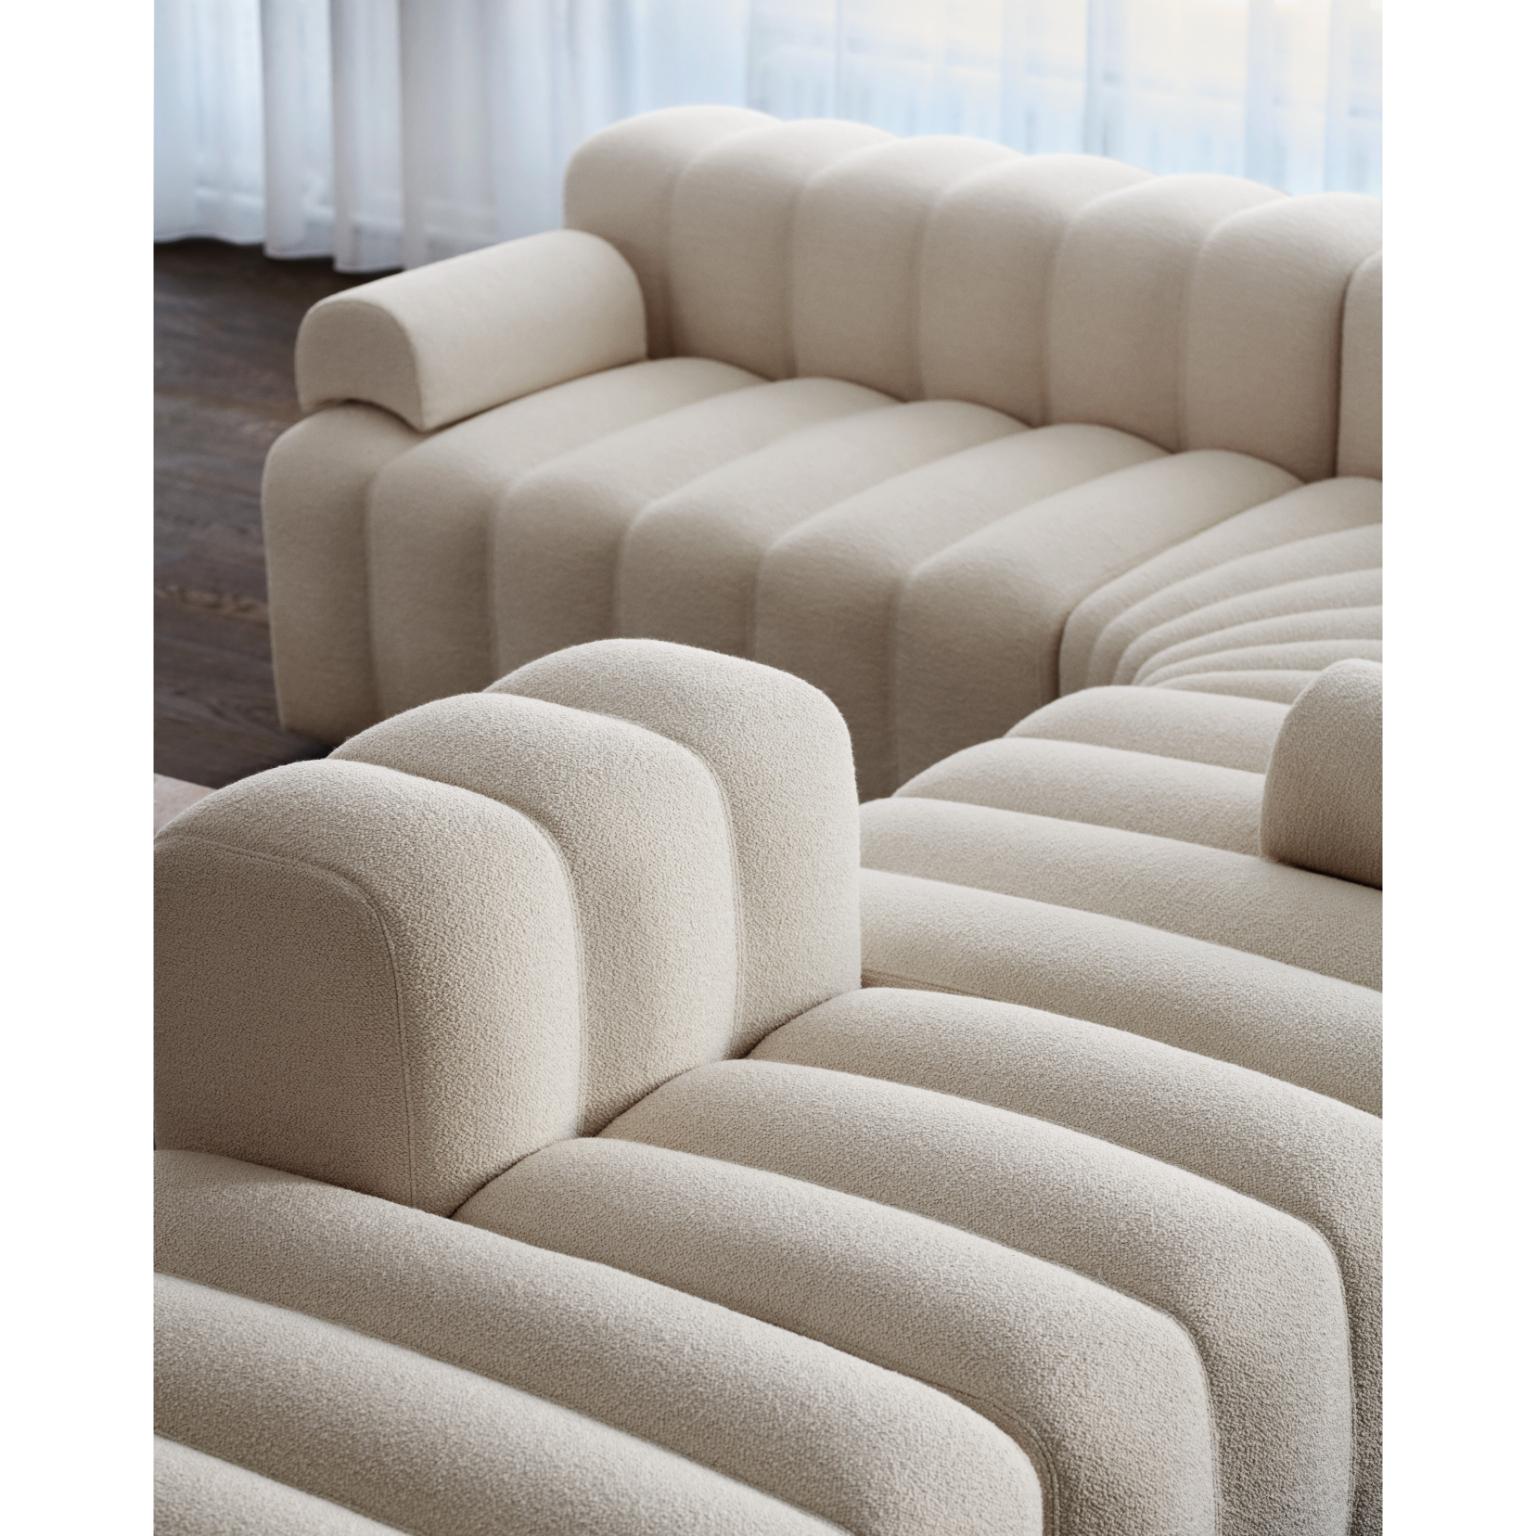 Studio Lounge Small Right Modular Sofa With Short Armrest by NORR11
Dimensions: D 130 x W 93 x H 70 cm. SH 47 cm. 
Materials: Foam, wood and upholstery.
Upholstery: Barnum Boucle Color 3.

Available in different upholstery options. A plywood